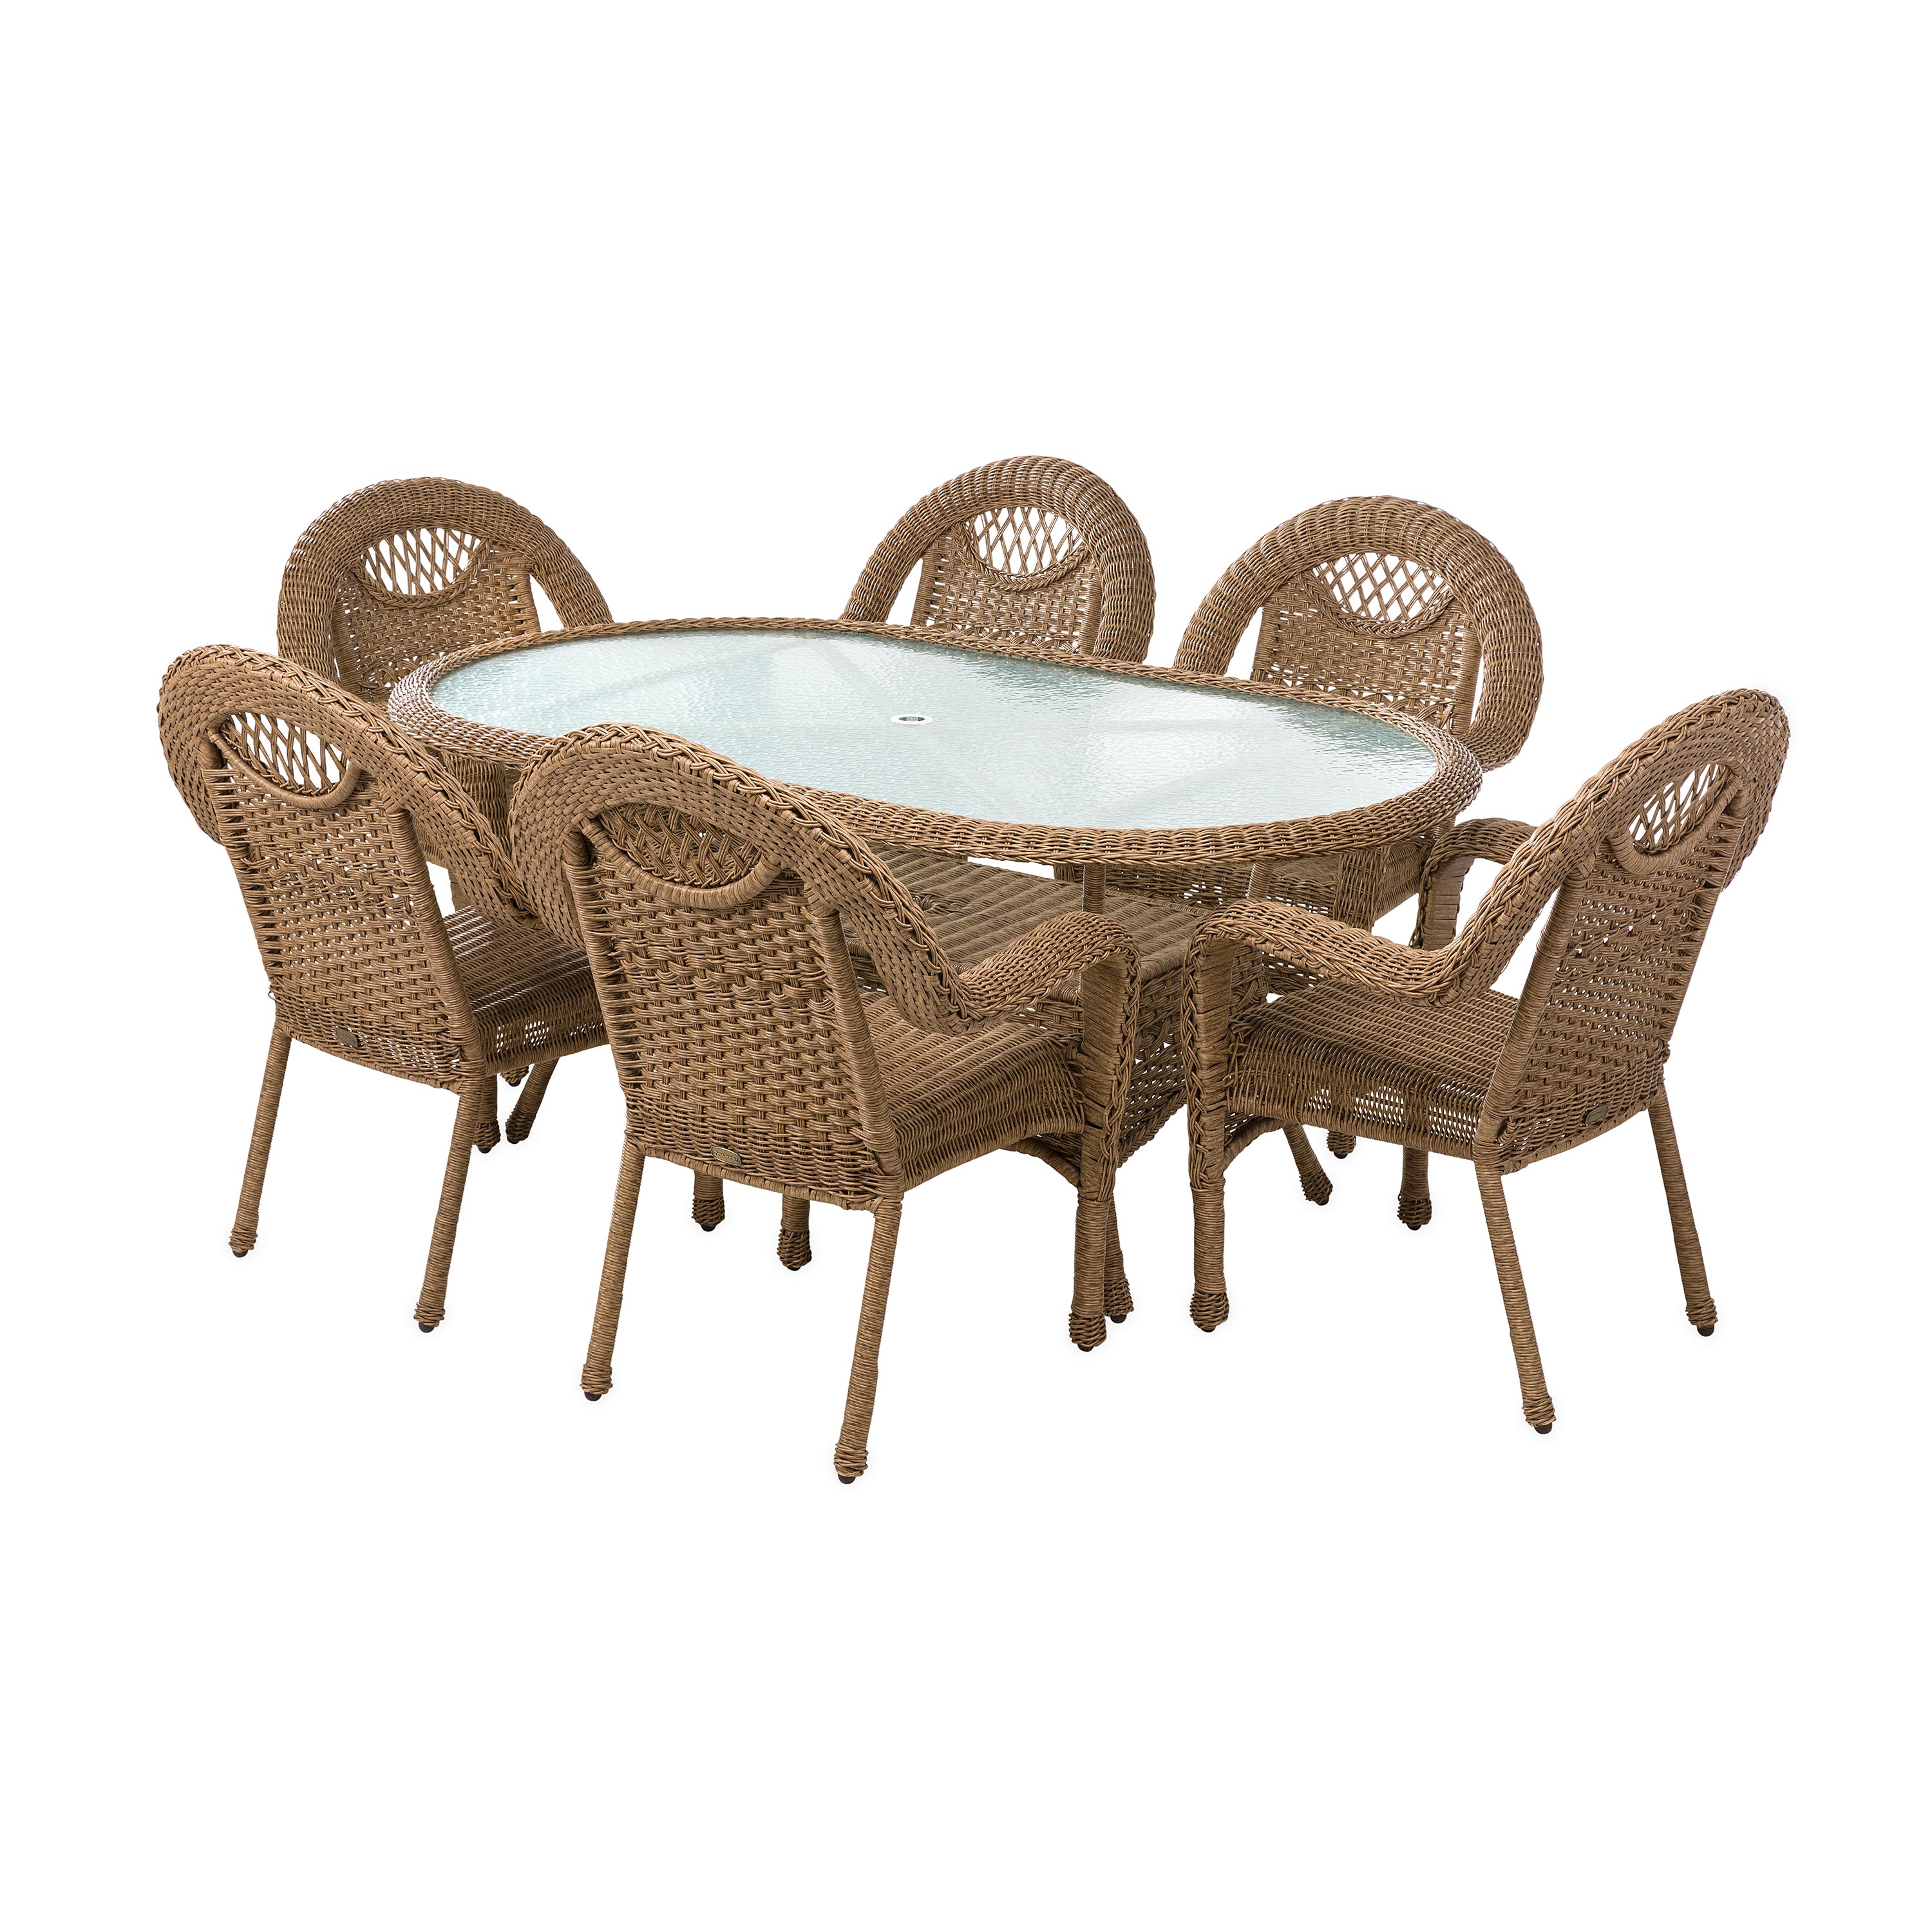 Prospect Hill Oval Dining Table and Chairs